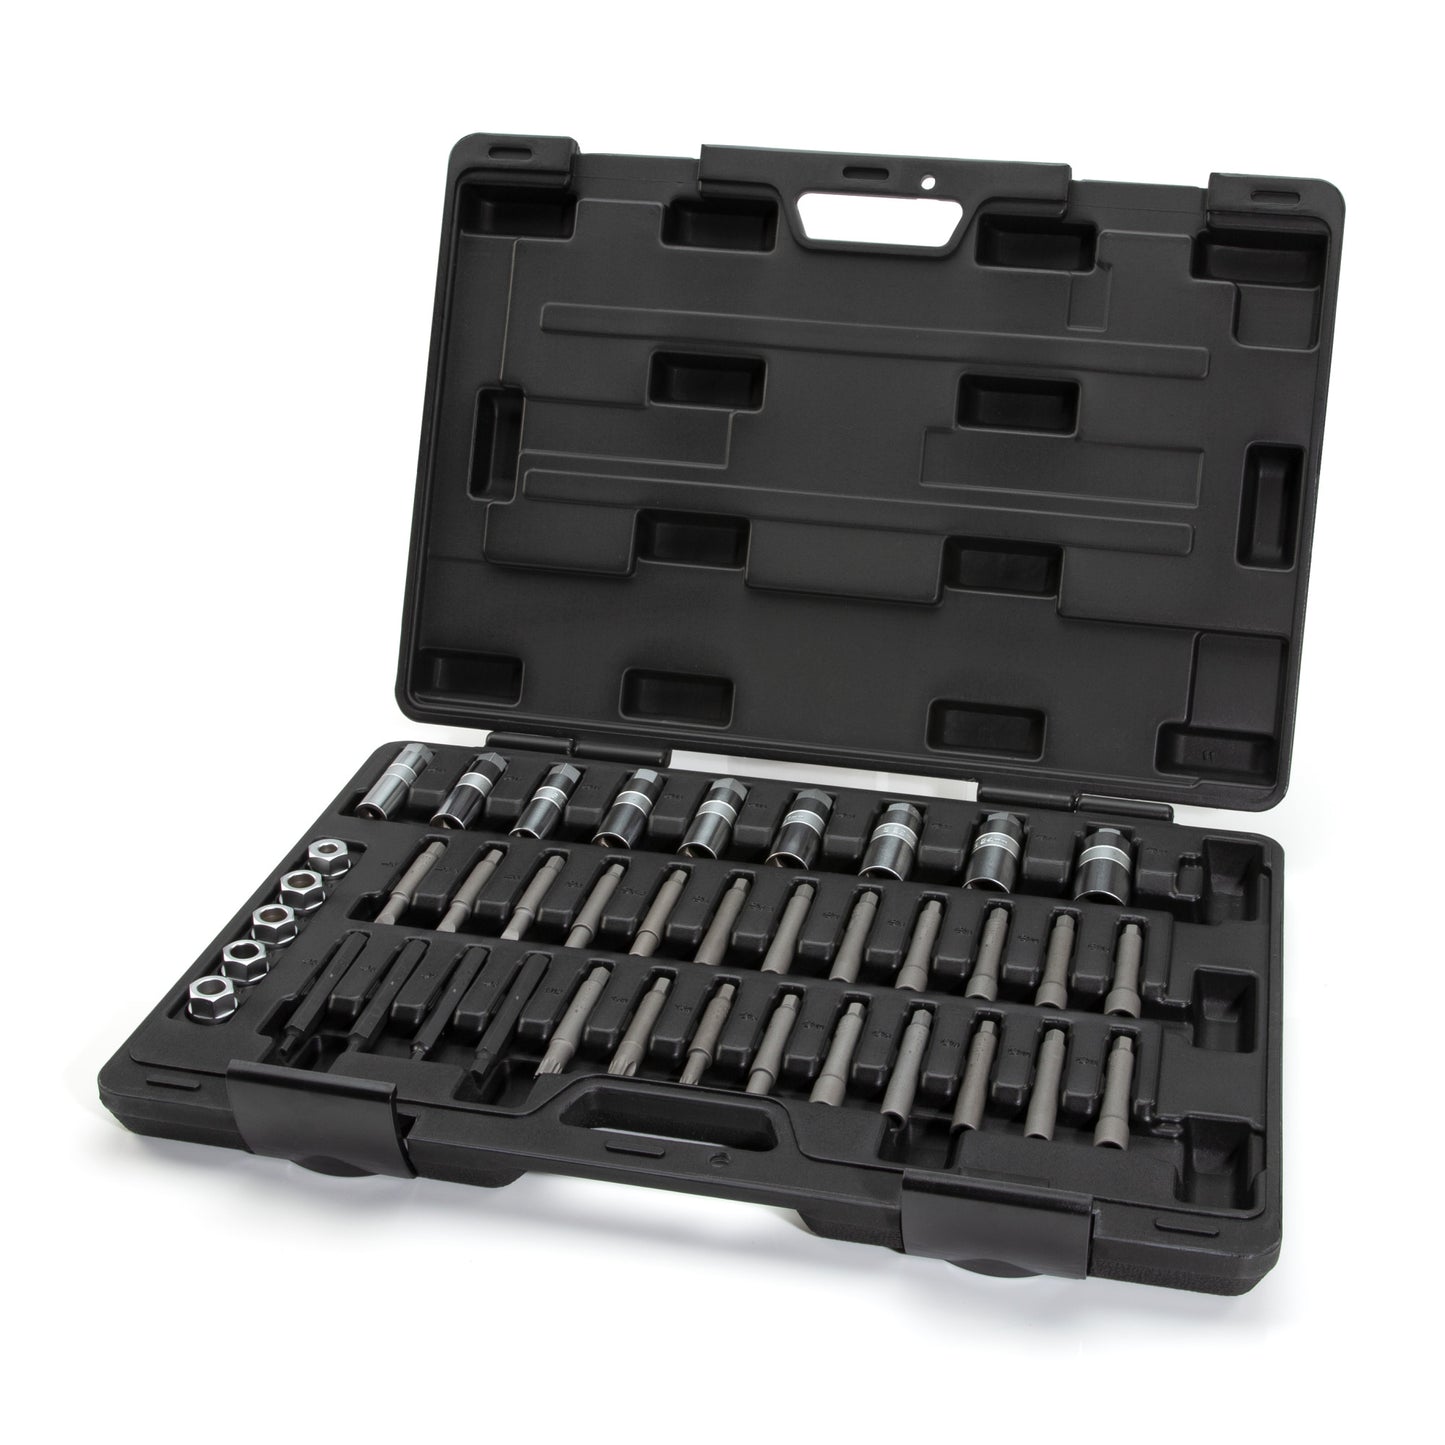 Repair and maintain vehicle front suspensions, struts, and shocks with the STEELMAN 39 Piece Strut / Shock Installation Tool Kit. Achieve precise torque when tightening the shock absorber piston rods with the included sockets and adapters.